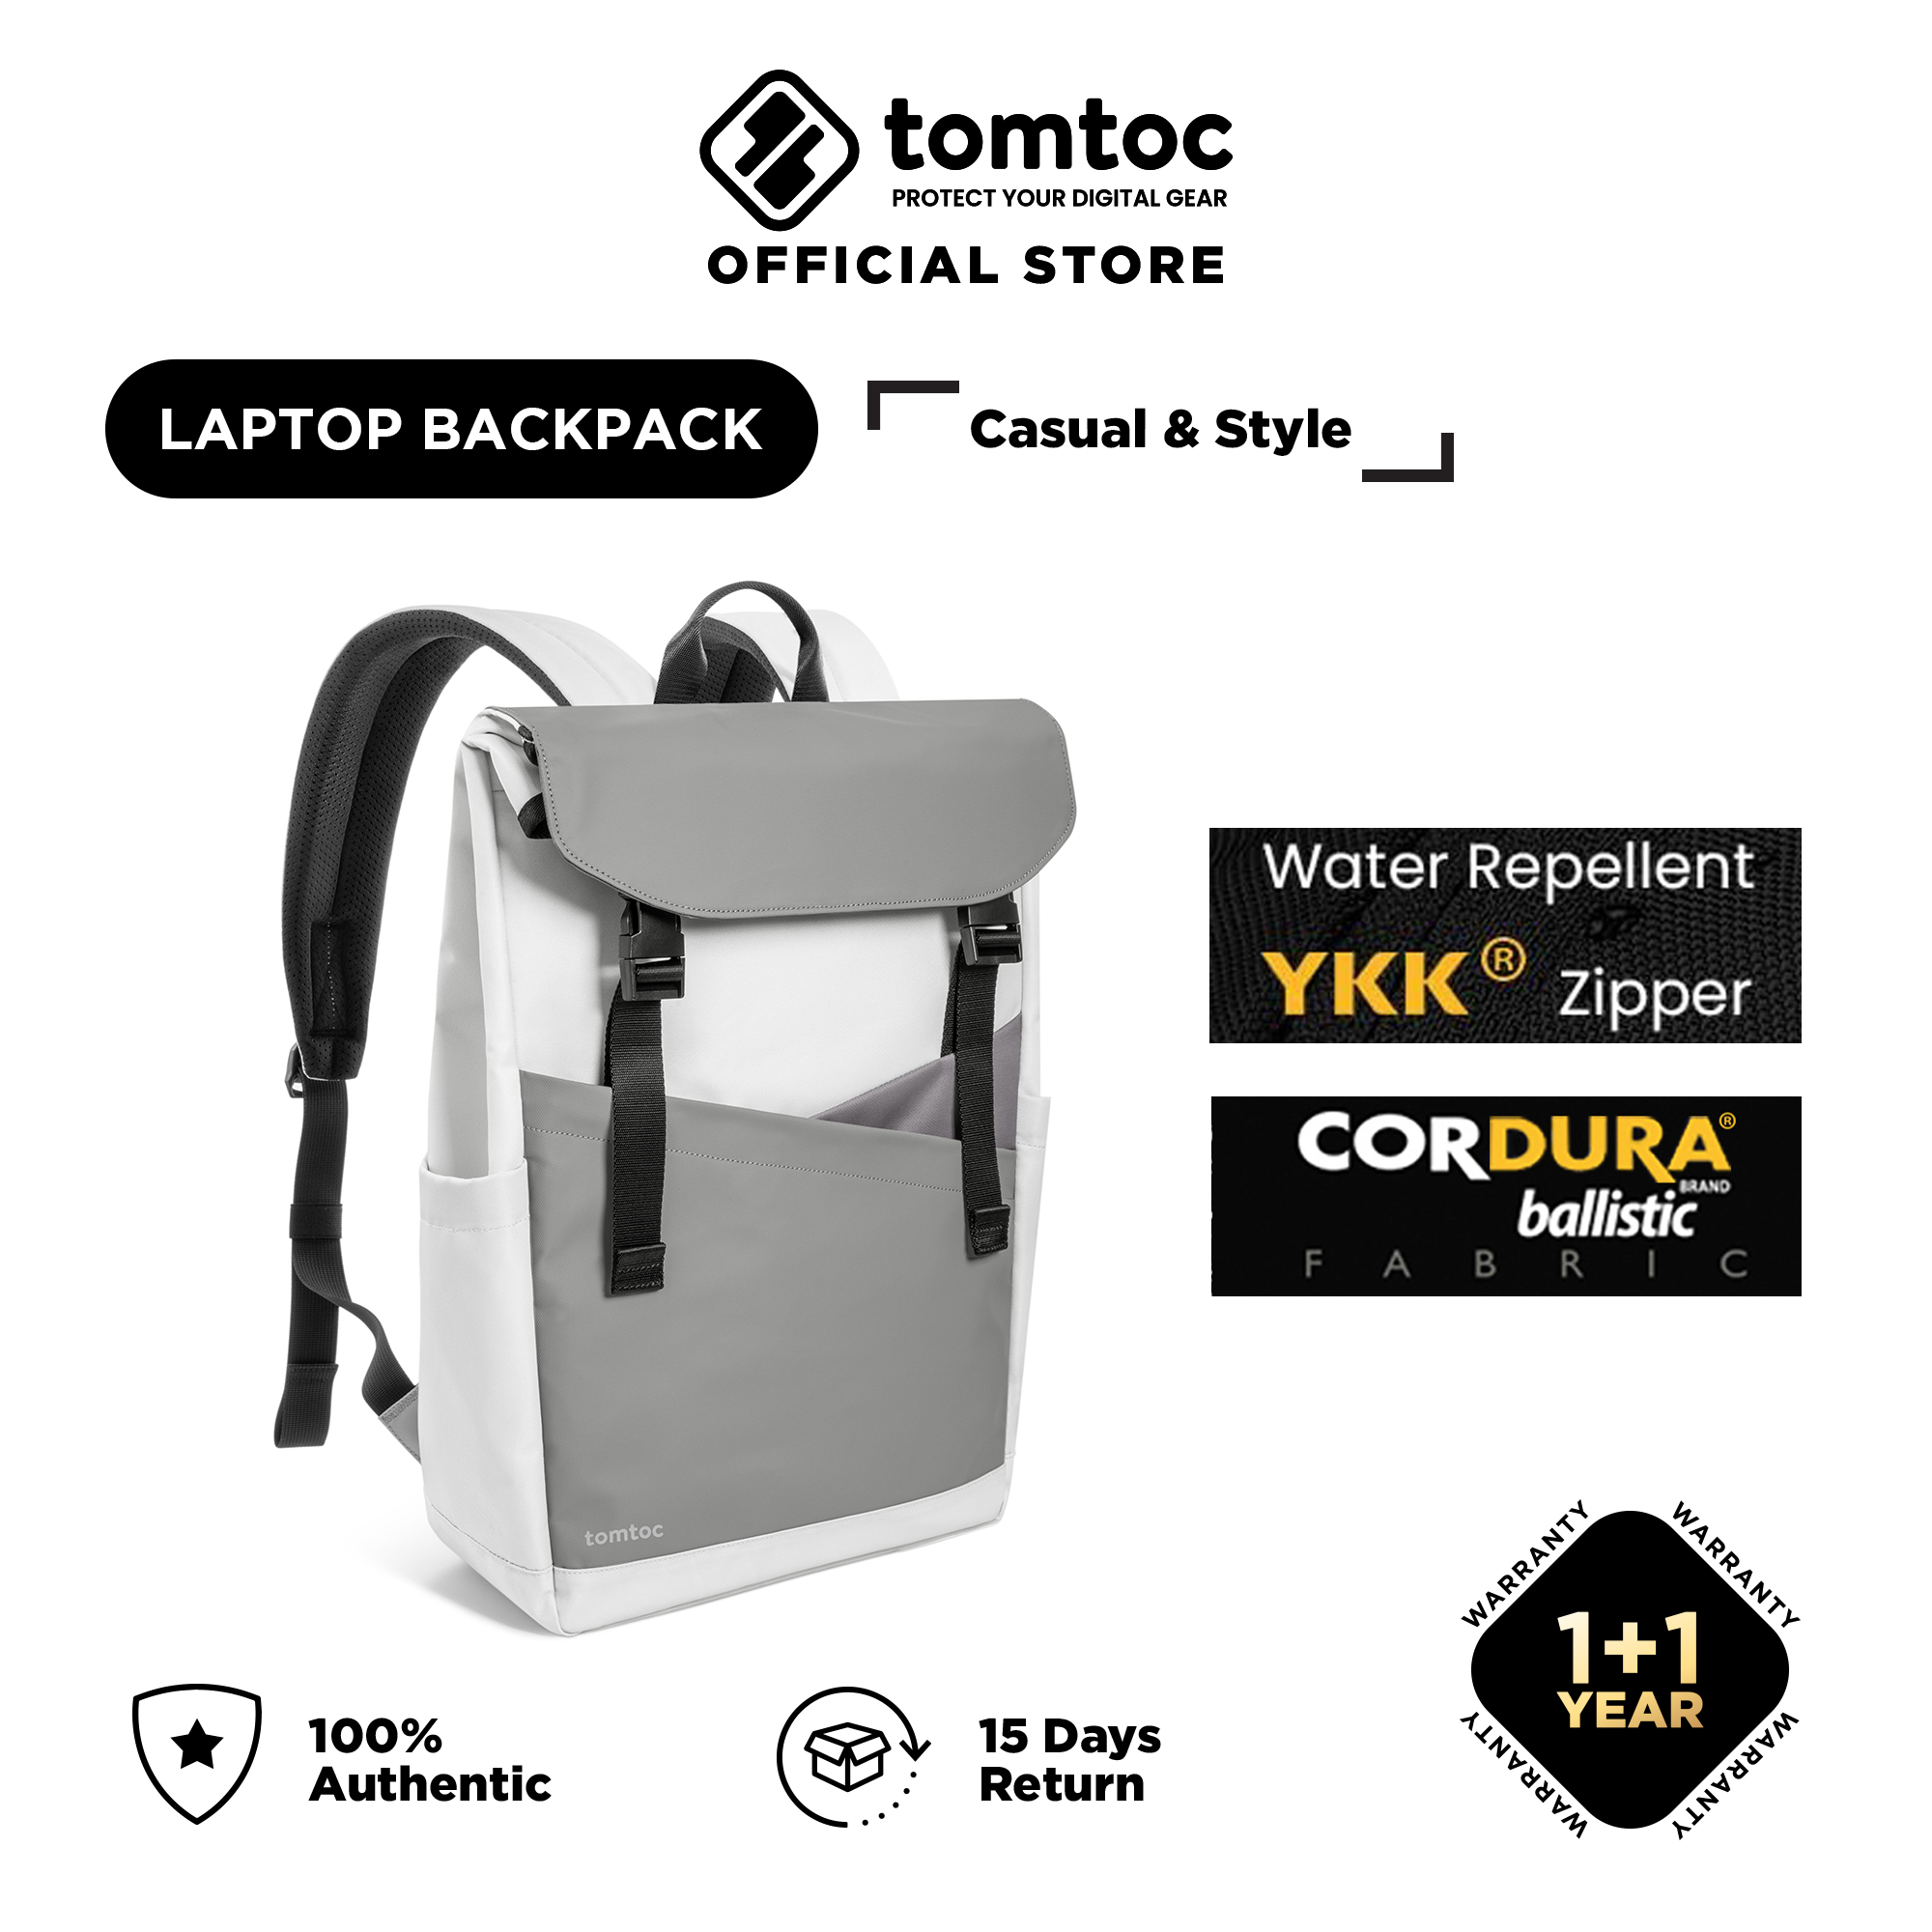 tomtoc 16 Inch Flap Lightweight & Water-Resistant Laptop Backpack - Te